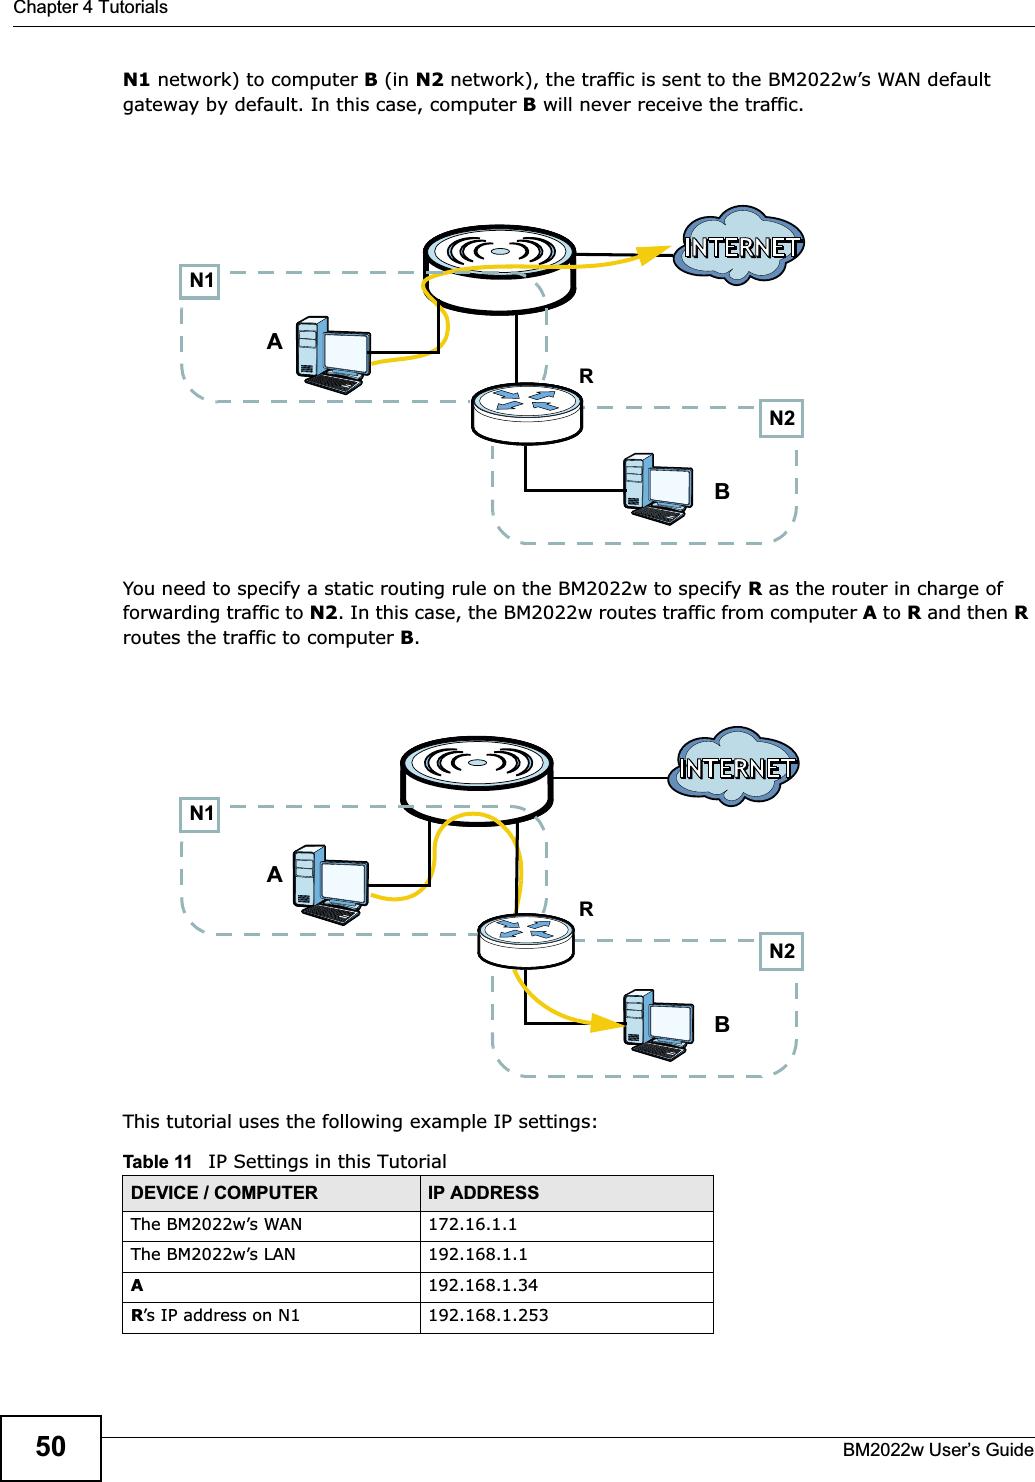 Chapter 4 TutorialsBM2022w User’s Guide50N1 network) to computer B (in N2 network), the traffic is sent to the BM2022w’s WAN default gateway by default. In this case, computer B will never receive the traffic.You need to specify a static routing rule on the BM2022w to specify R as the router in charge of forwarding traffic to N2. In this case, the BM2022w routes traffic from computer A to R and then Rroutes the traffic to computer B.This tutorial uses the following example IP settings:Table 11   IP Settings in this TutorialDEVICE / COMPUTER IP ADDRESSThe BM2022w’s WAN 172.16.1.1The BM2022w’s LAN 192.168.1.1A192.168.1.34R’s IP address on N1  192.168.1.253N2BARN1N2BN1AR